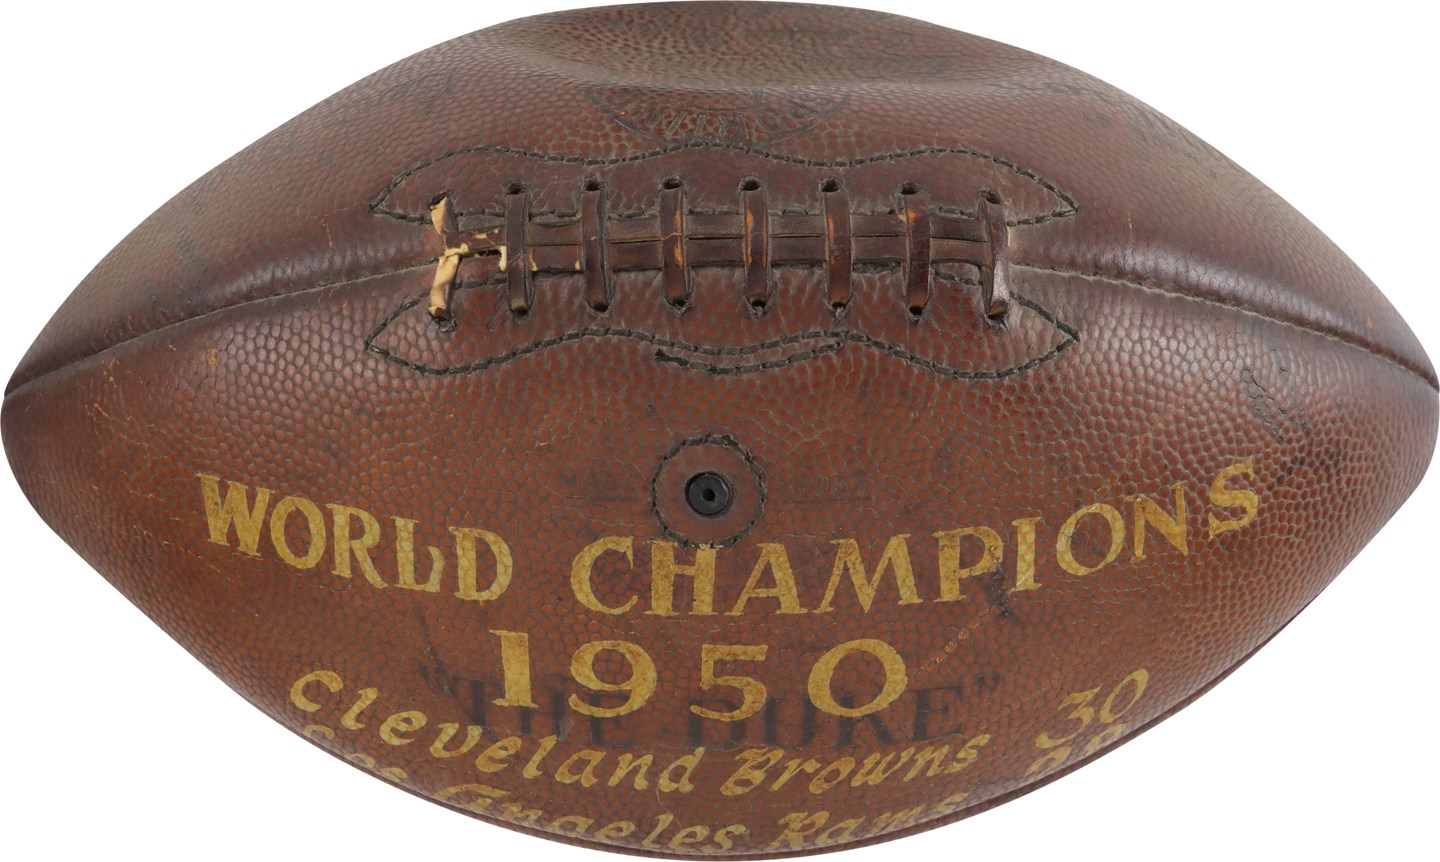 The Mac Speedie Football Collection - 1950 NFL Championship Game Ball - Browns vs. Rams - Cleveland's 1st NFL Championship! - Mac Speedie Collection